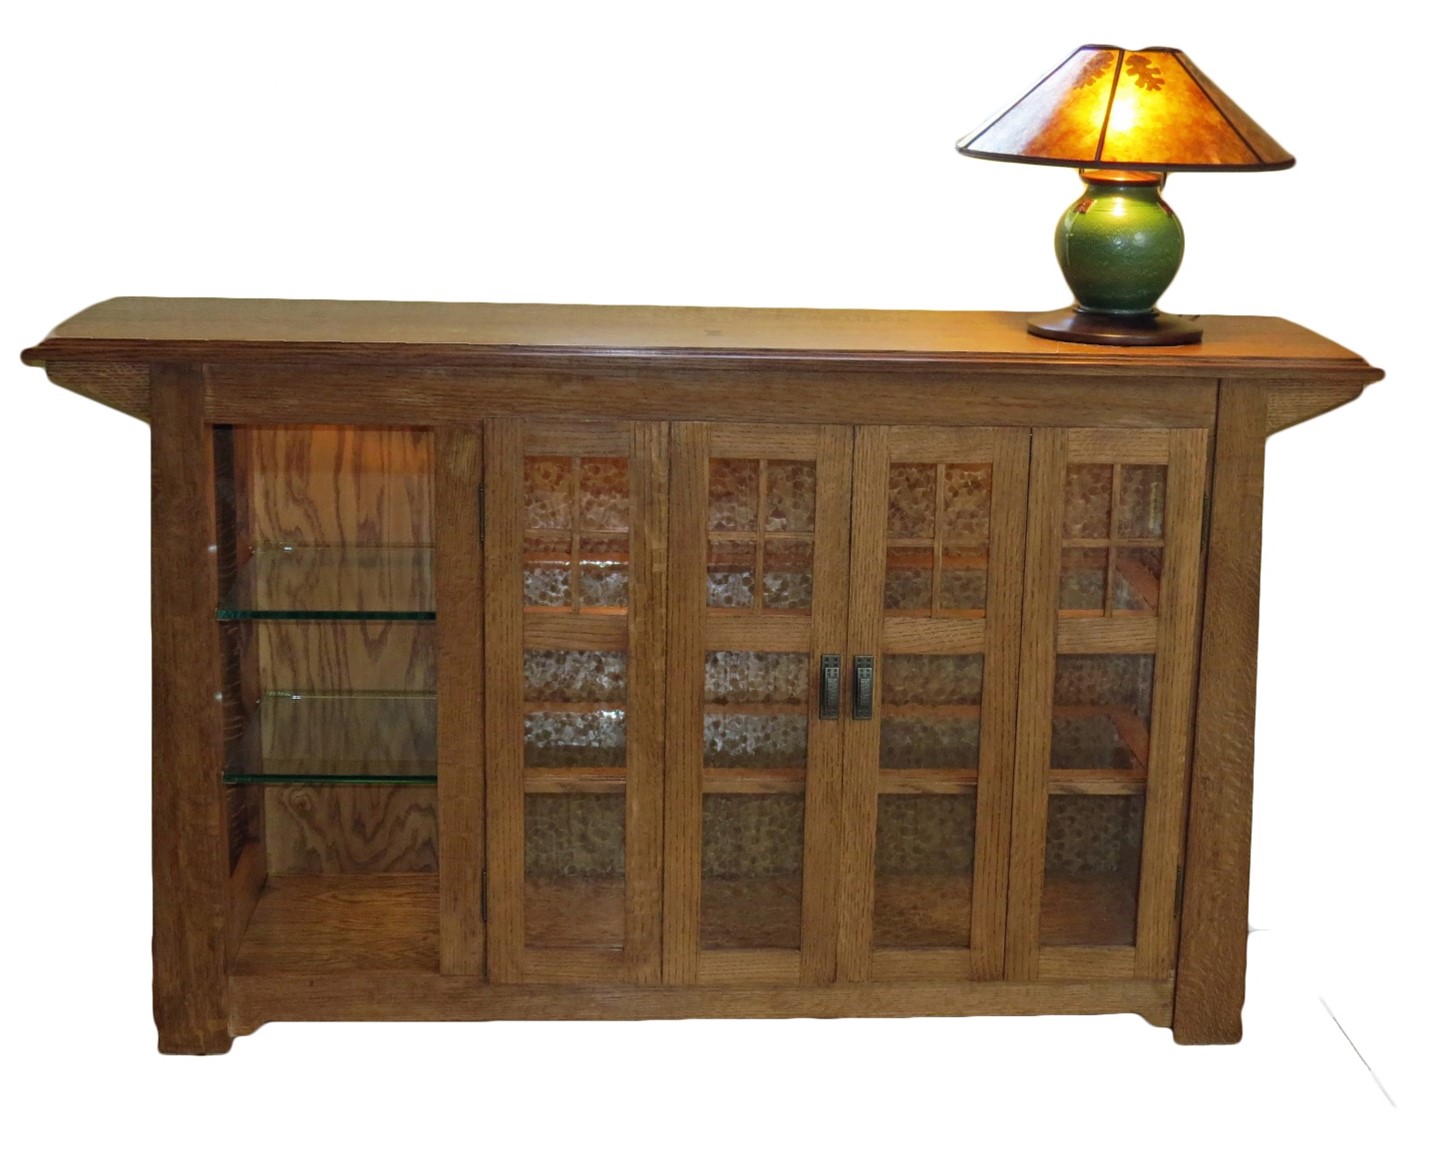 California West Bookcase & Display Cabinet